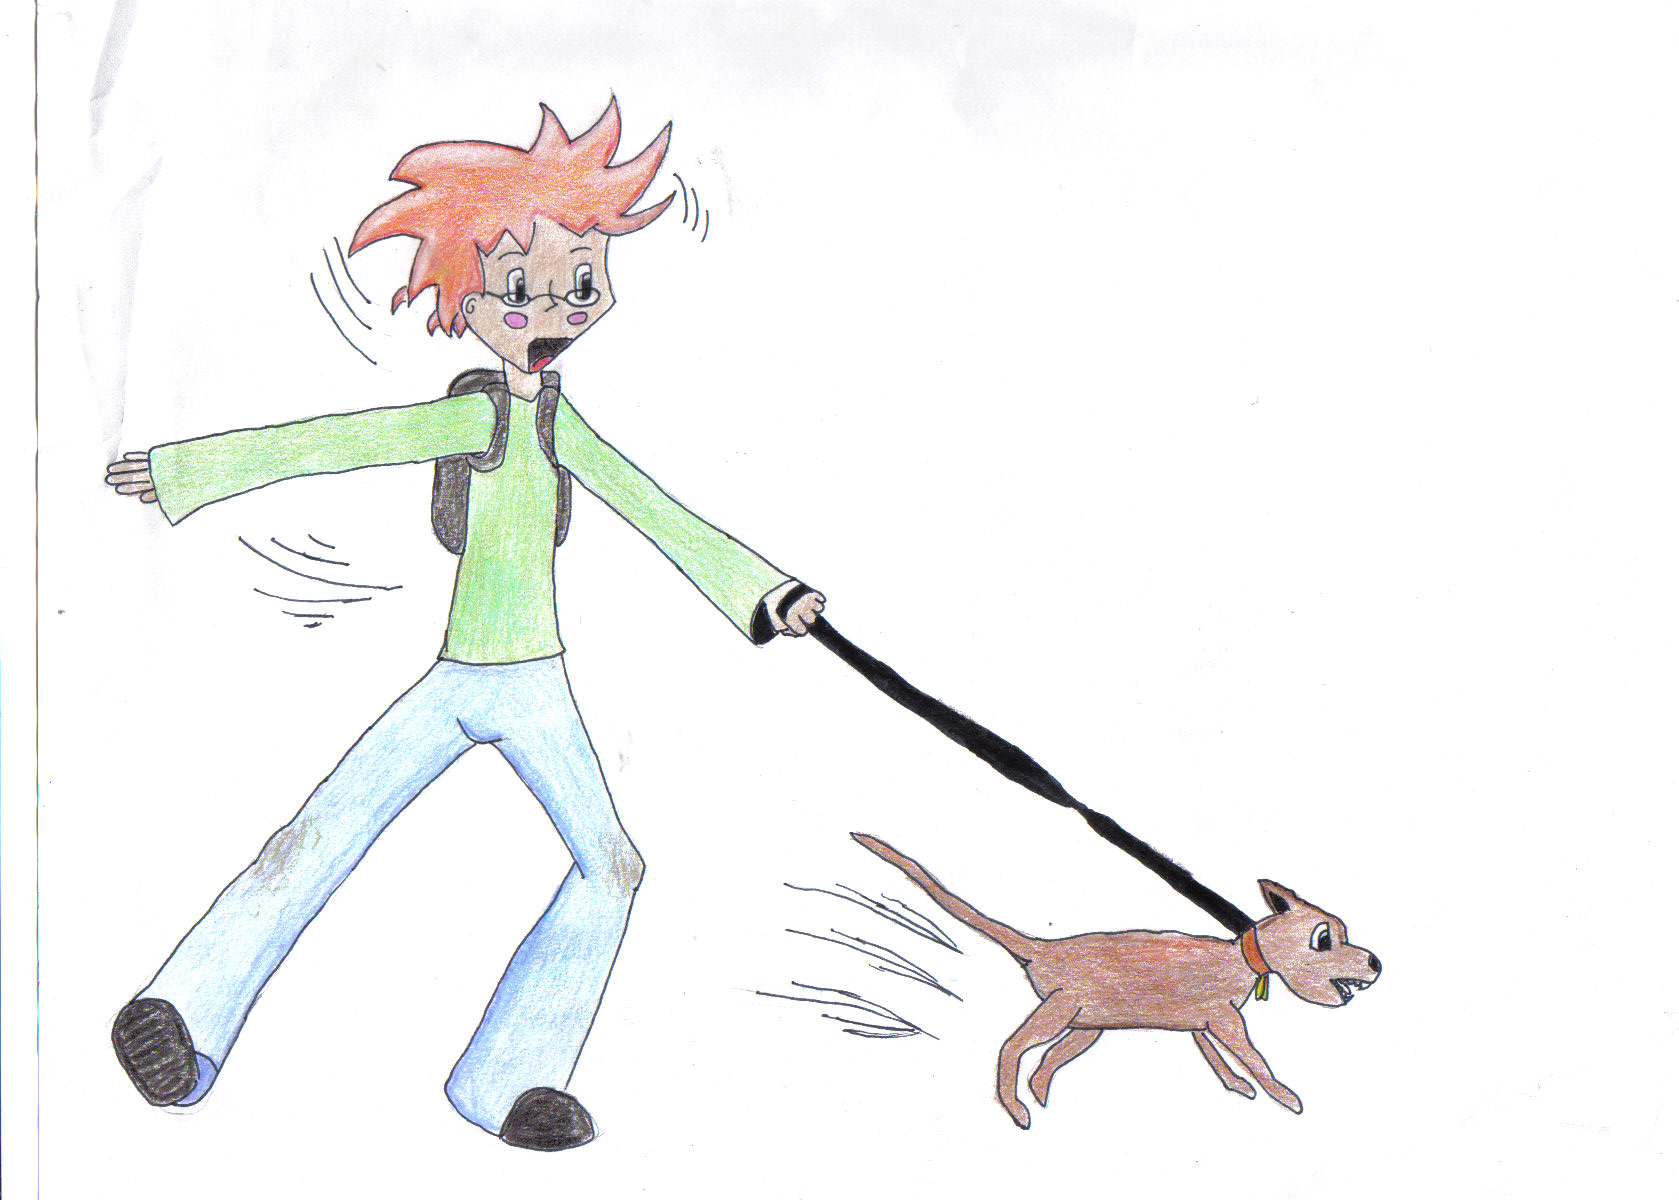 A Boy and his Dog by Innsomnia